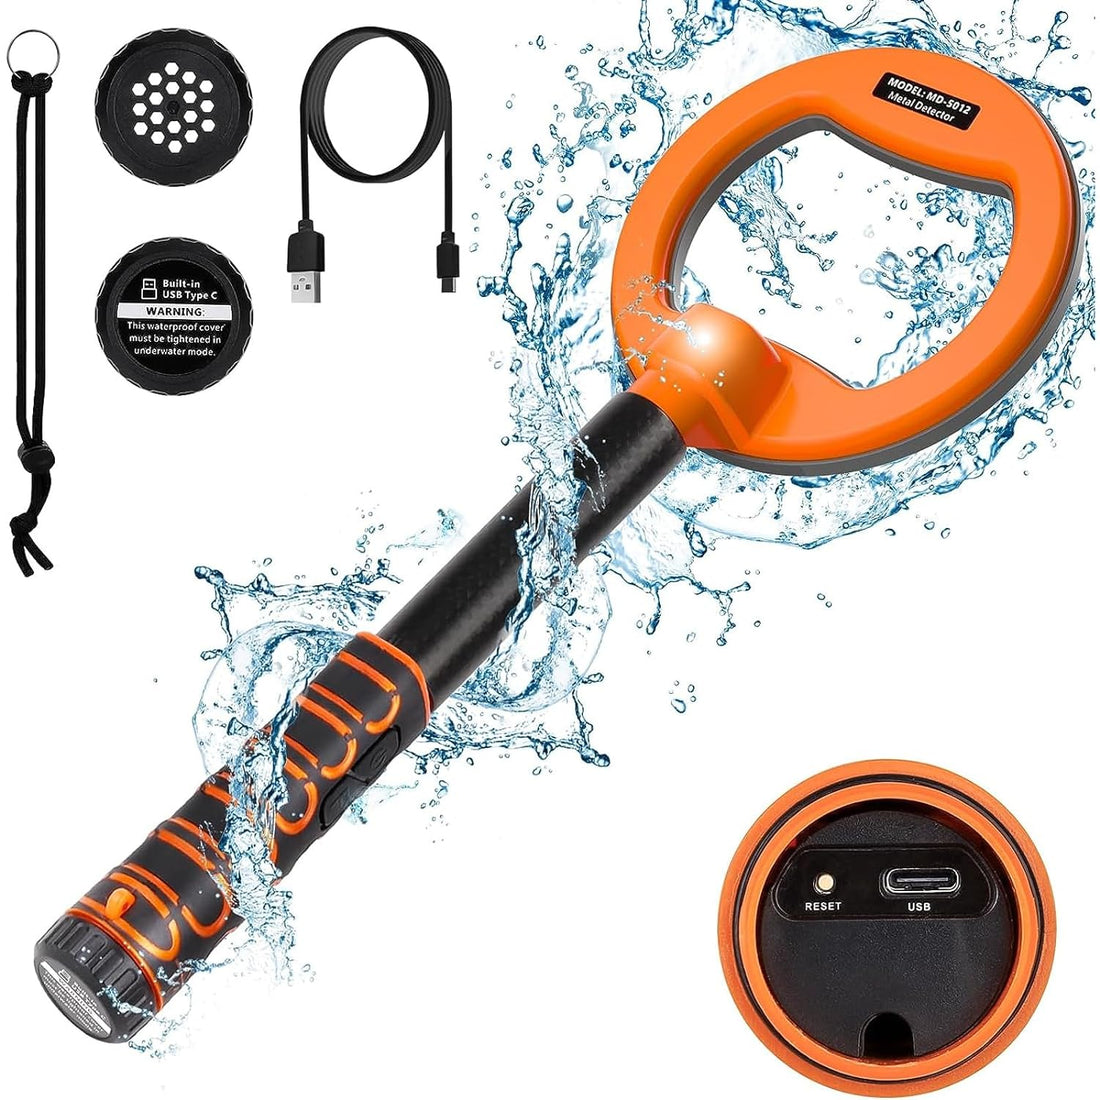 OMMO Underwater Metal Detector, Fully IP68 Waterproof Metal Detector with 3 Modes Vibration &Sound, Metal Detector for Adults with Rechargeable 1600MA Battery for Underwater Exploration Scuba Diving